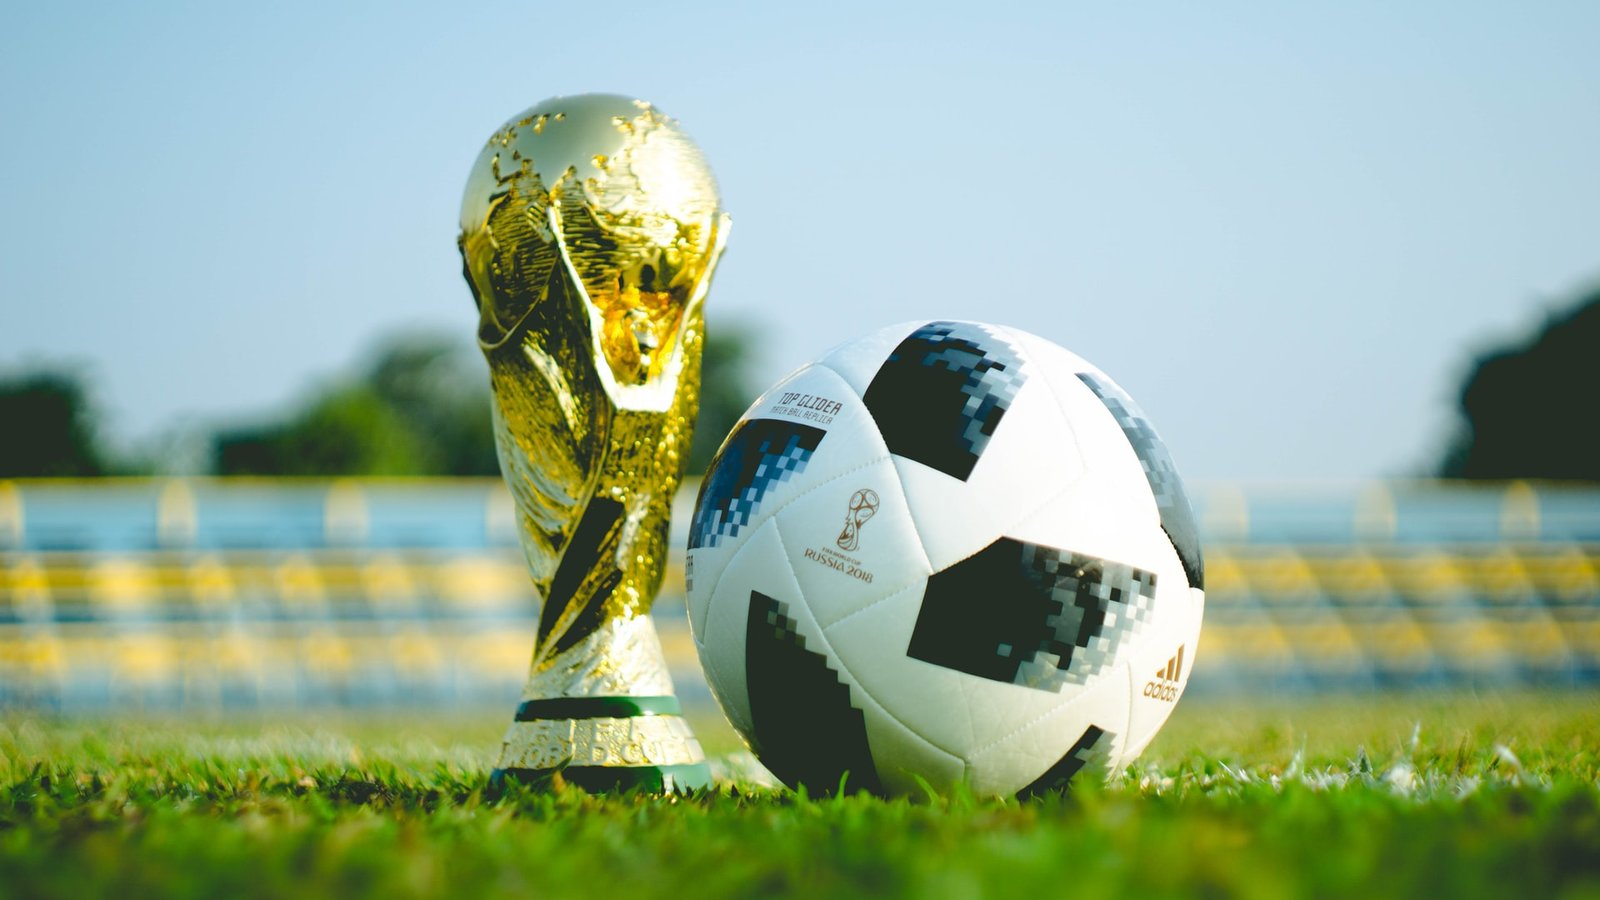 Which Nations Have the Highest Chances of Winning the FIFA World Cup 2022?